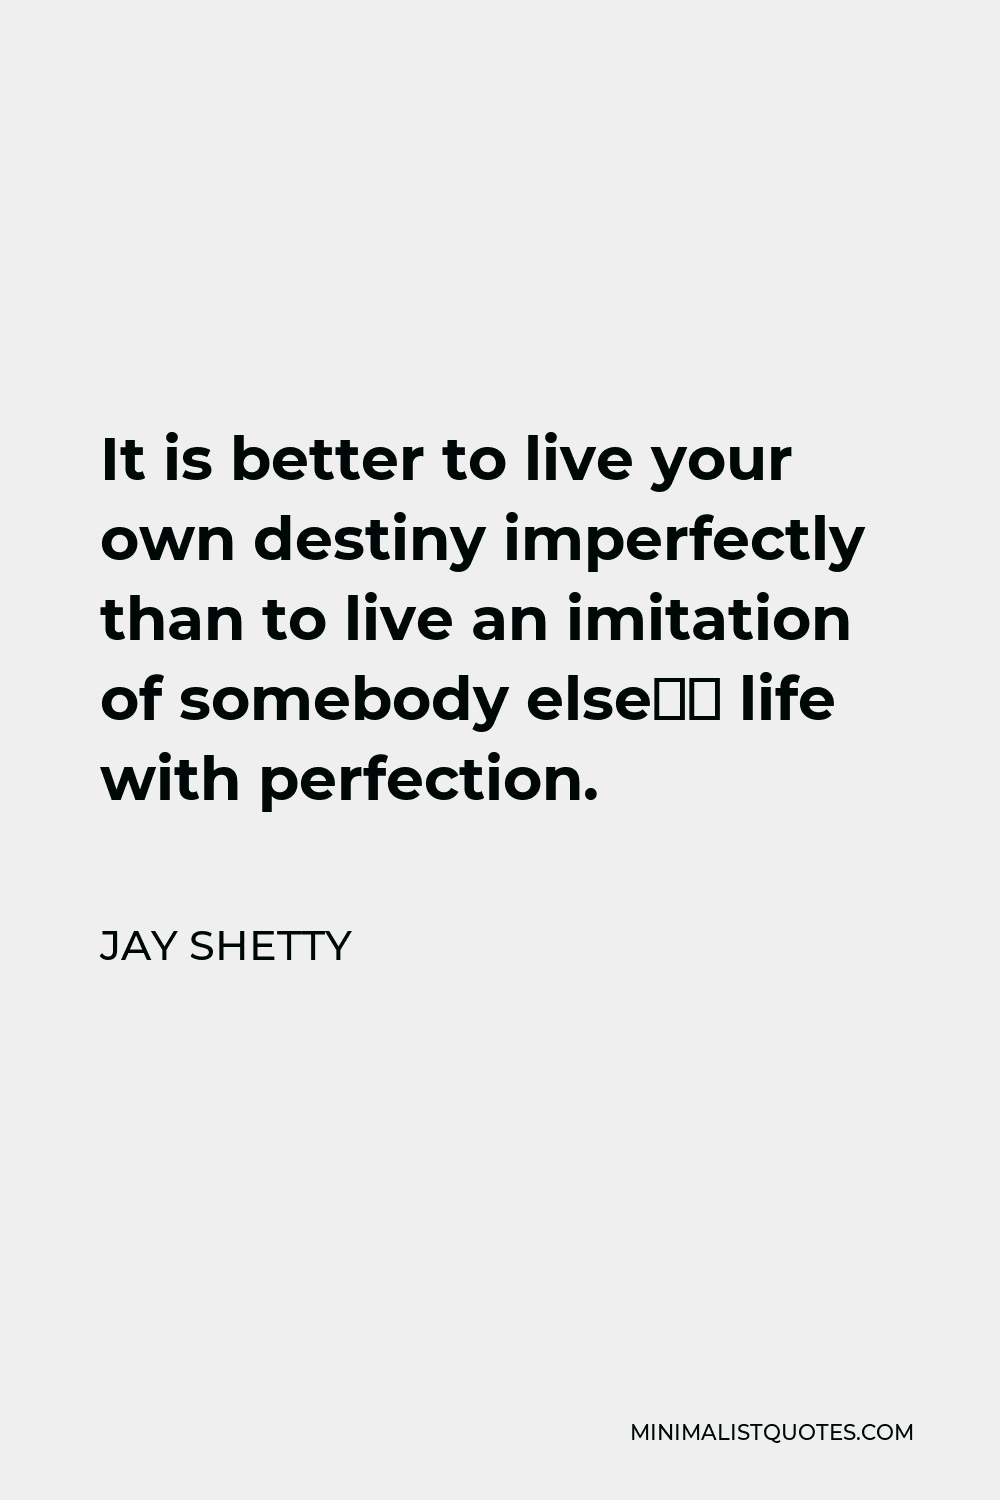 Jay Shetty Quote - It is better to live your own destiny imperfectly than to live an imitation of somebody else’s life with perfection.